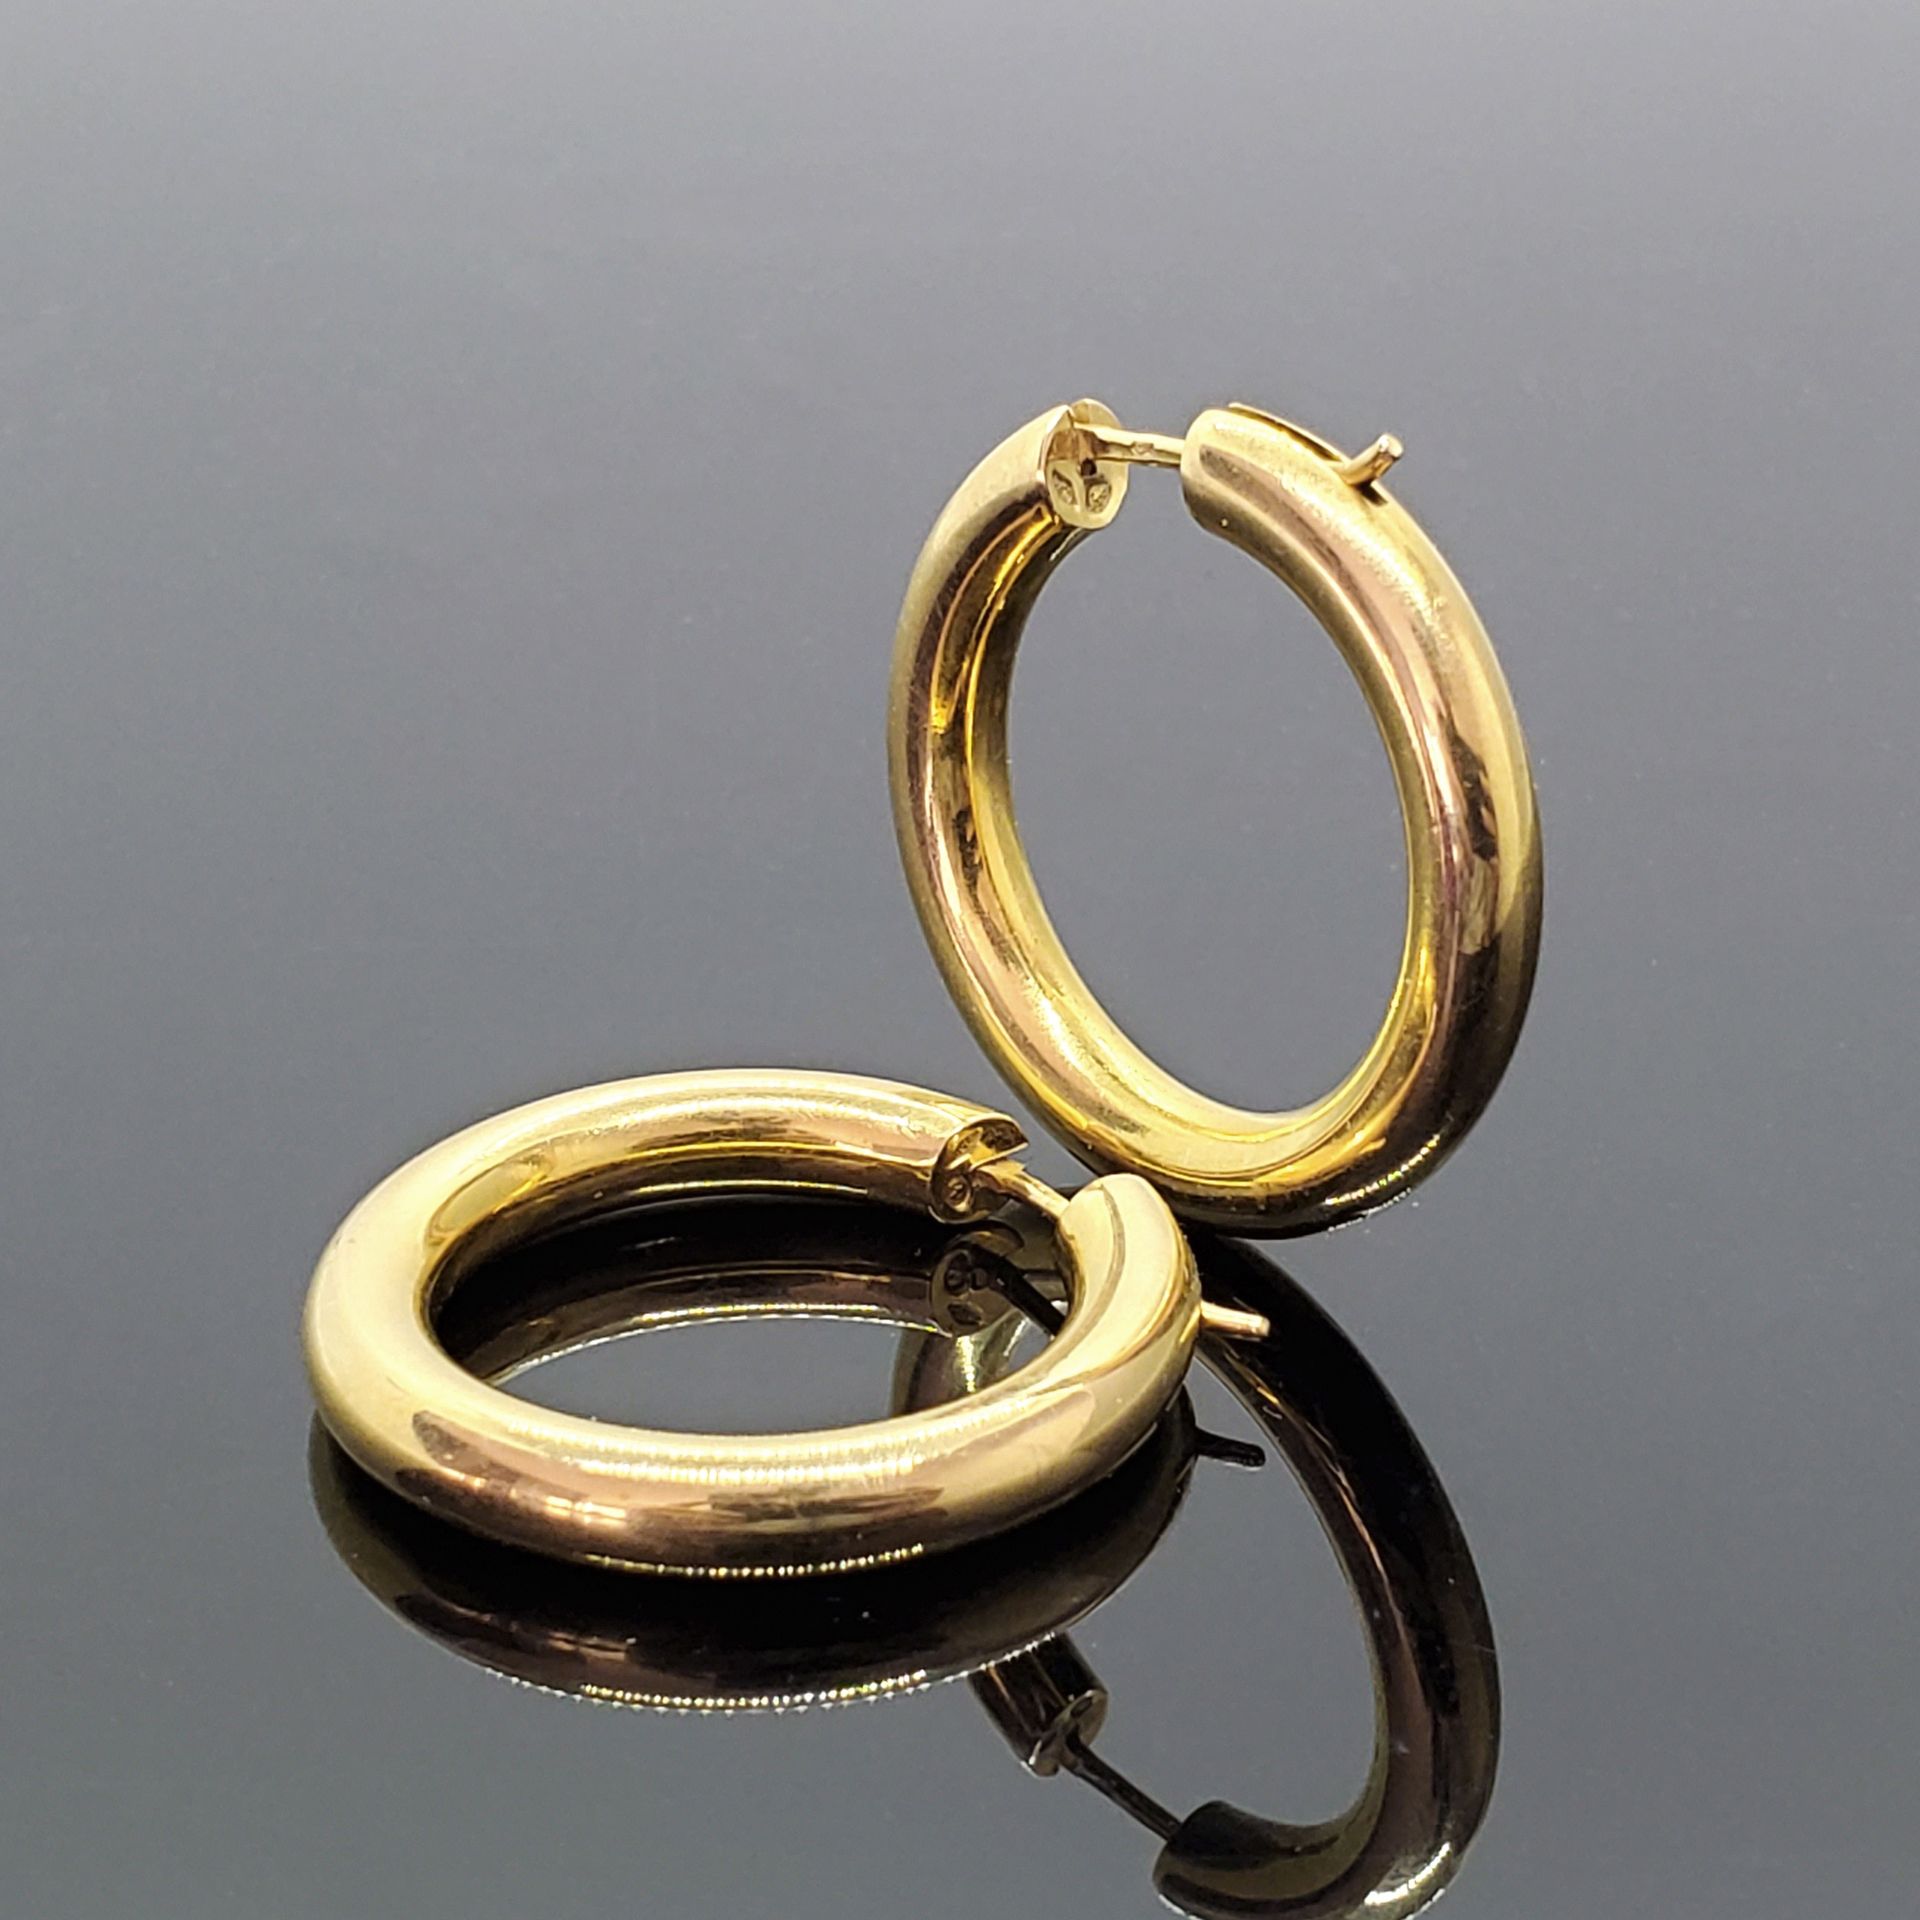 Null Pair of CREOLES in plain yellow gold 750 mils. Weight 9,9 g D. 3,3 cm